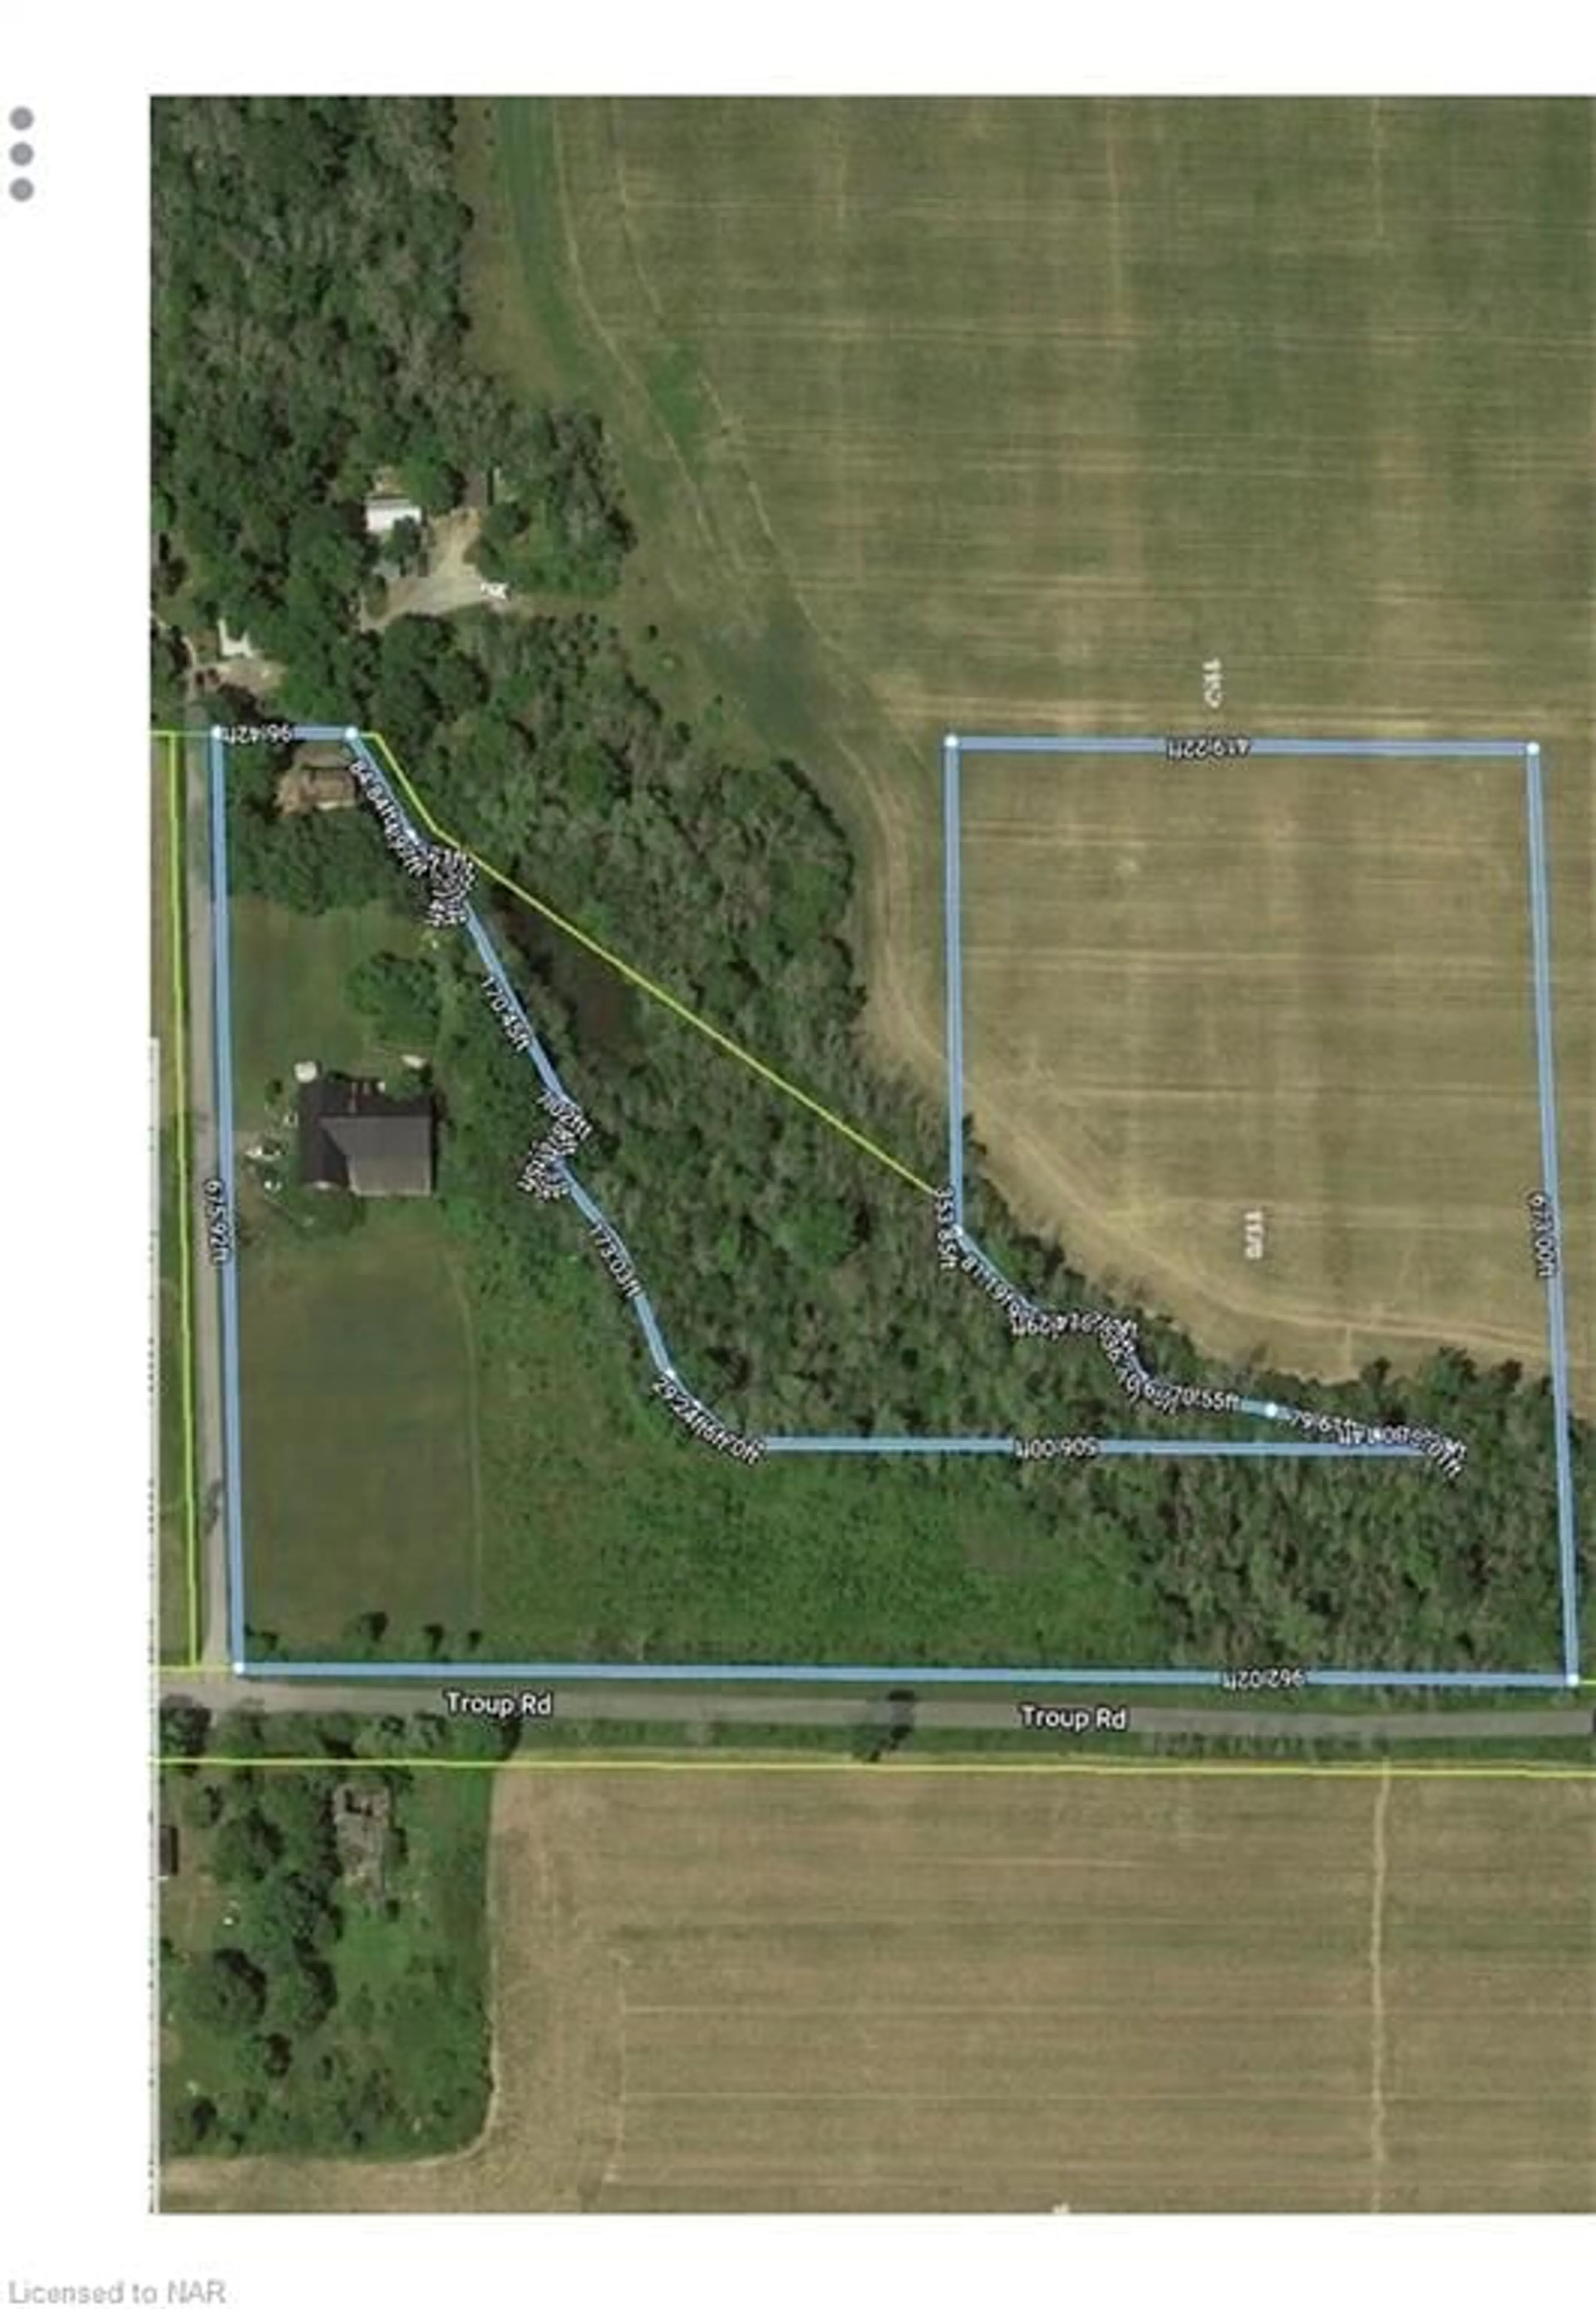 Fenced yard for 1170 Troup Rd, Sherkston Ontario L0S 1R0